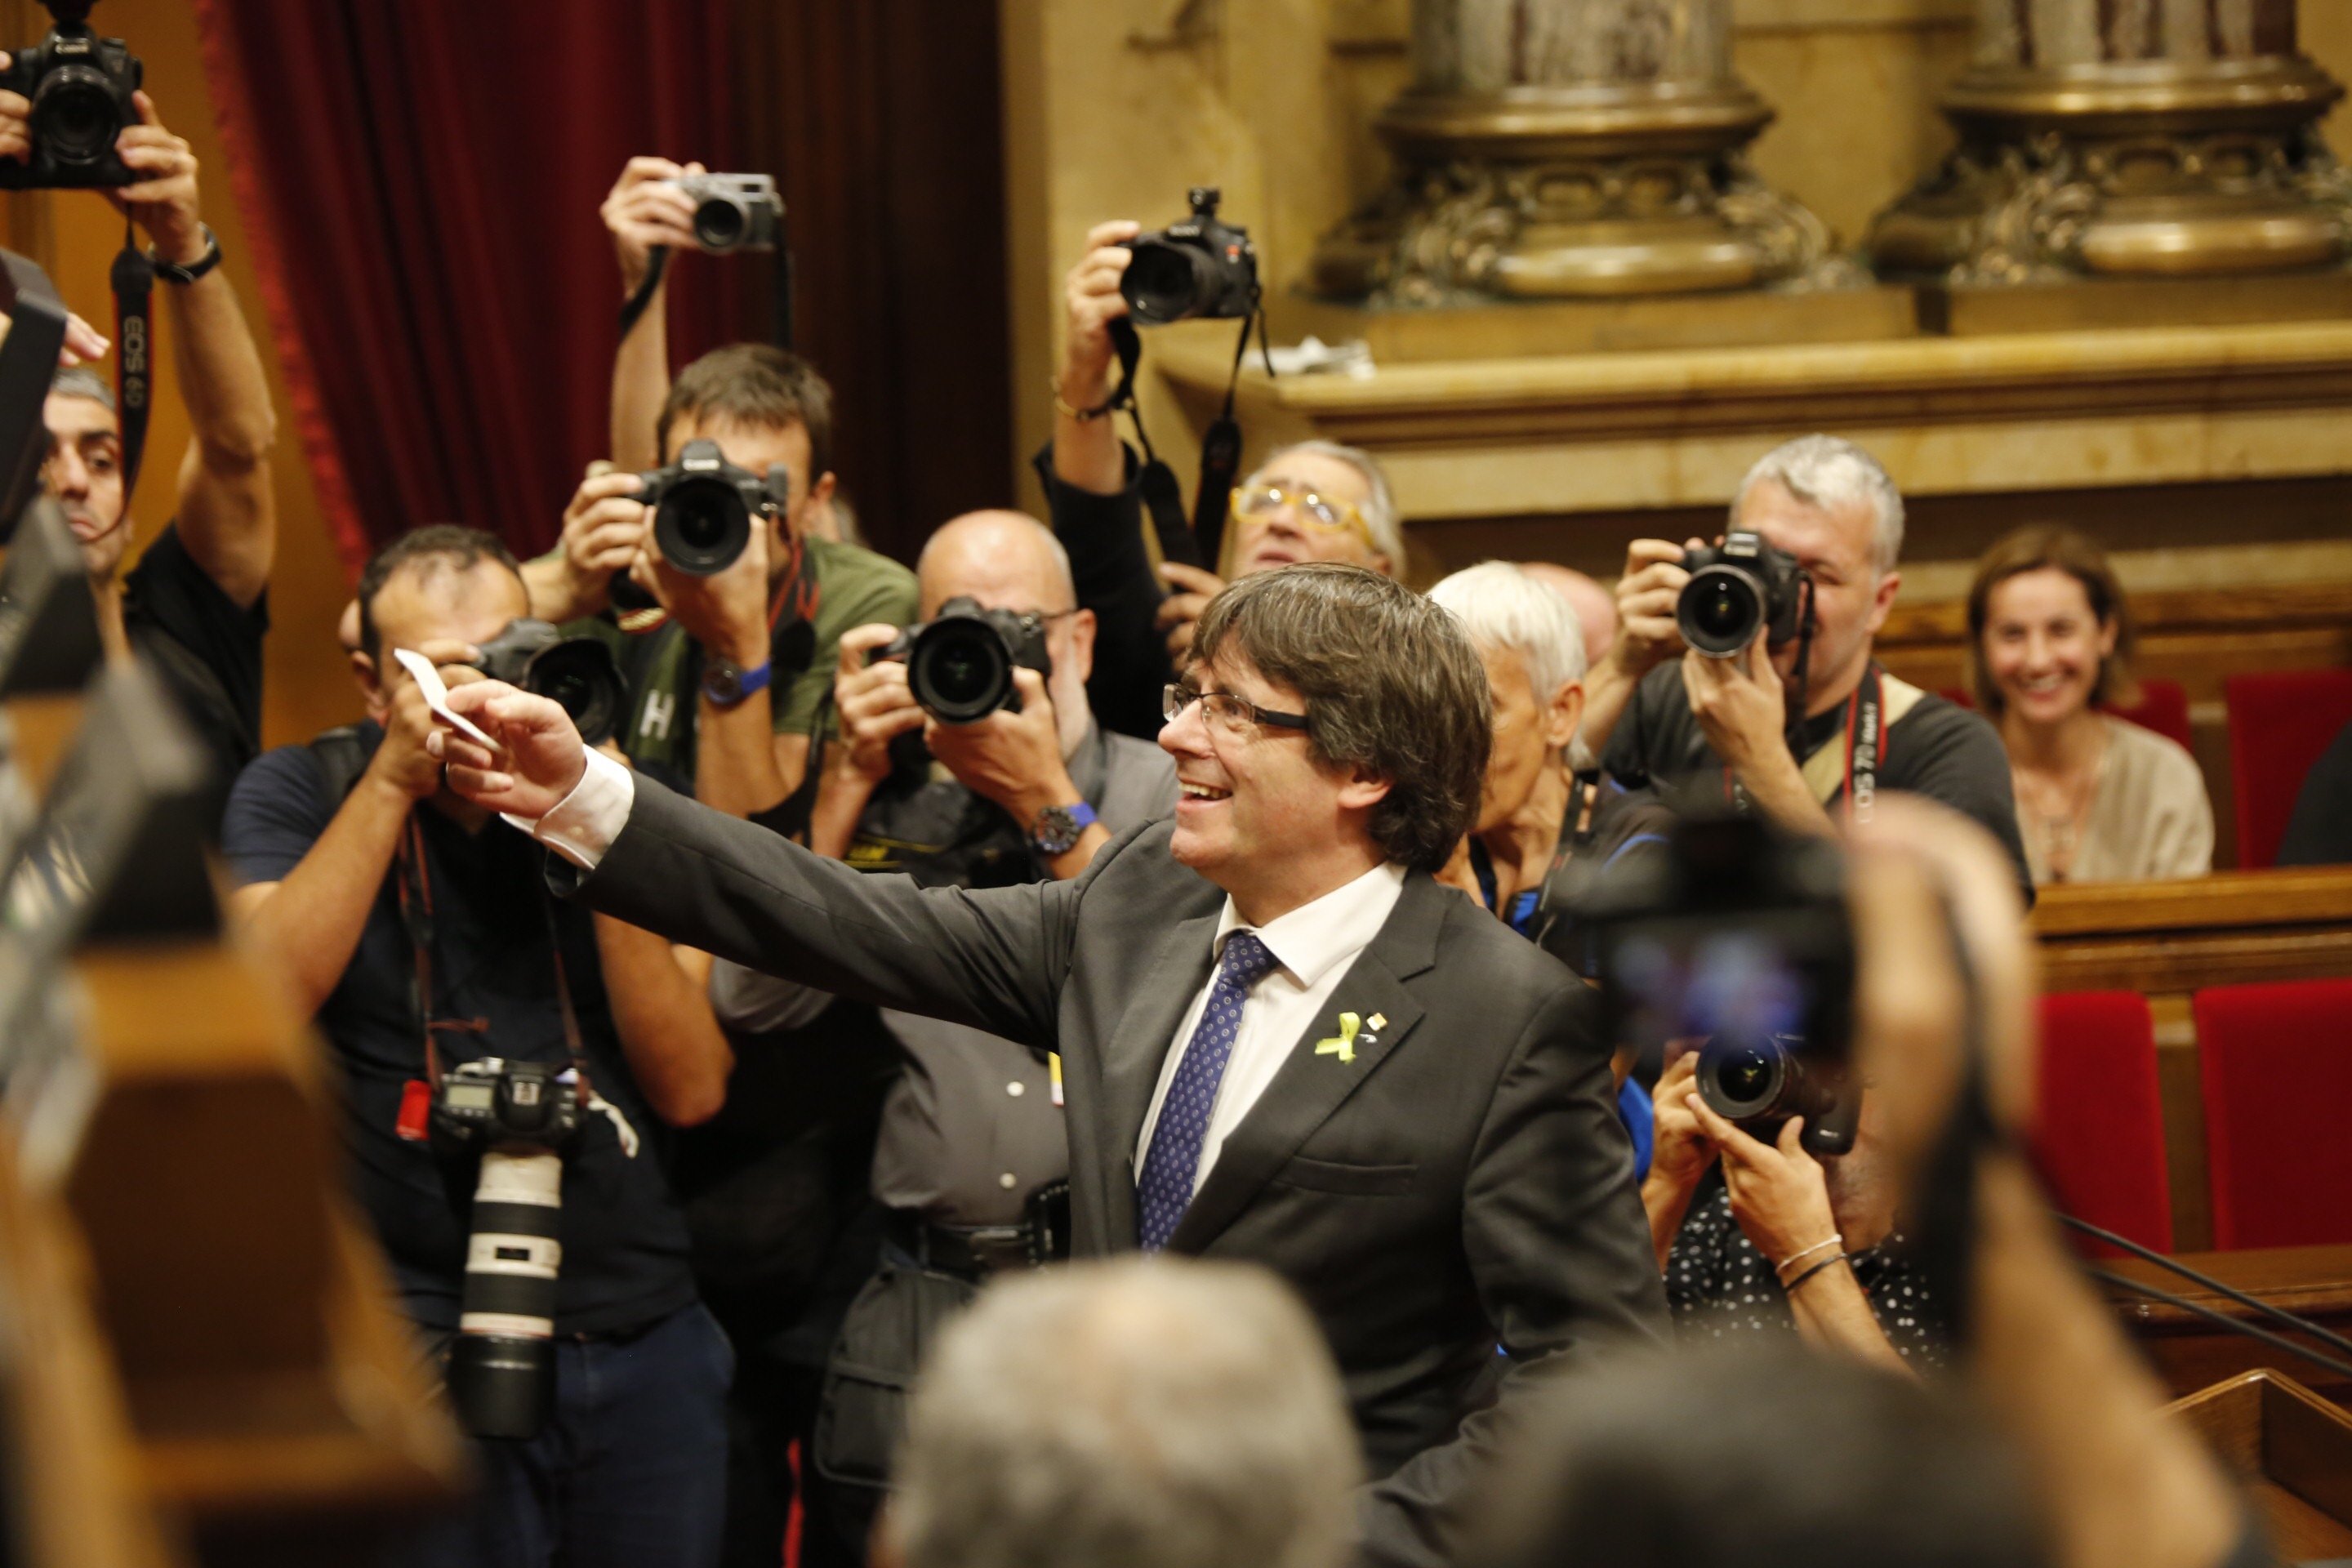 Parliament lawyers warn Puigdemont has to be present